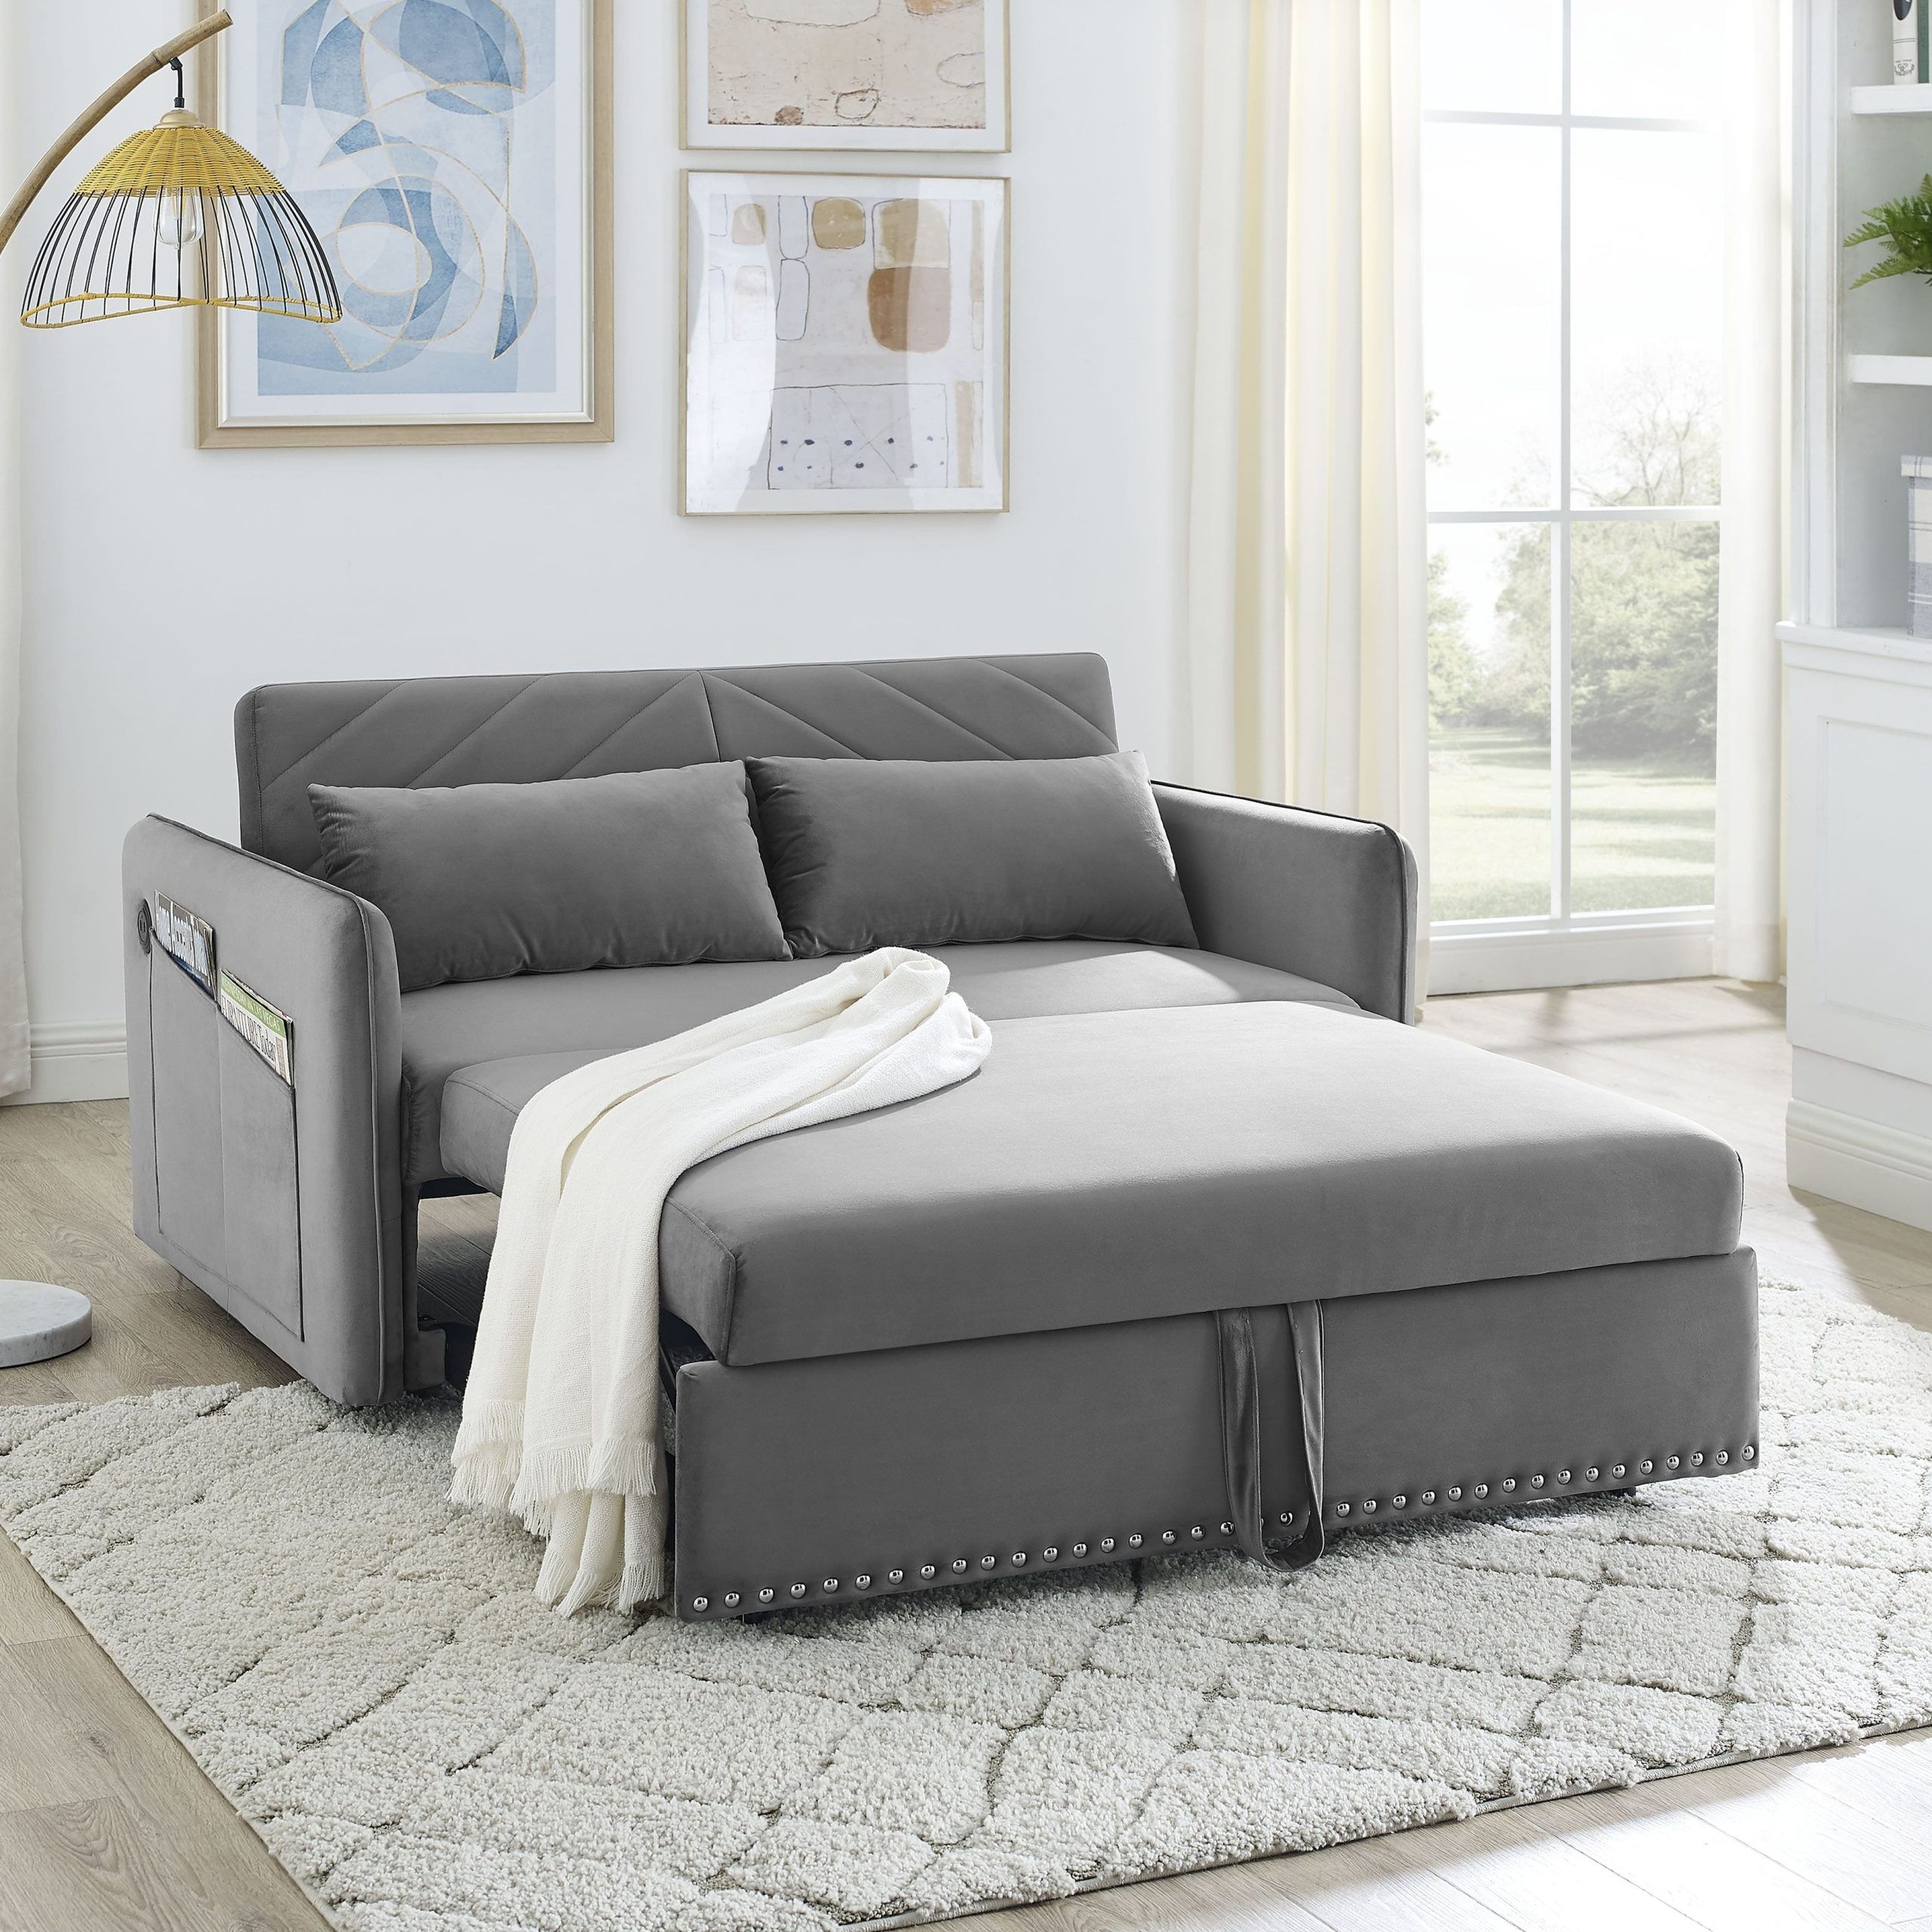 Velvet Pull Out Sleeper Sofa , 3 In 1 Adjustable Sleeper With Pull Out Bed,  2 Lumbar Pillows And Side Pocket – Bed Bath & Beyond – 38084240 Within 3 In 1 Gray Pull Out Sleeper Sofas (View 3 of 15)